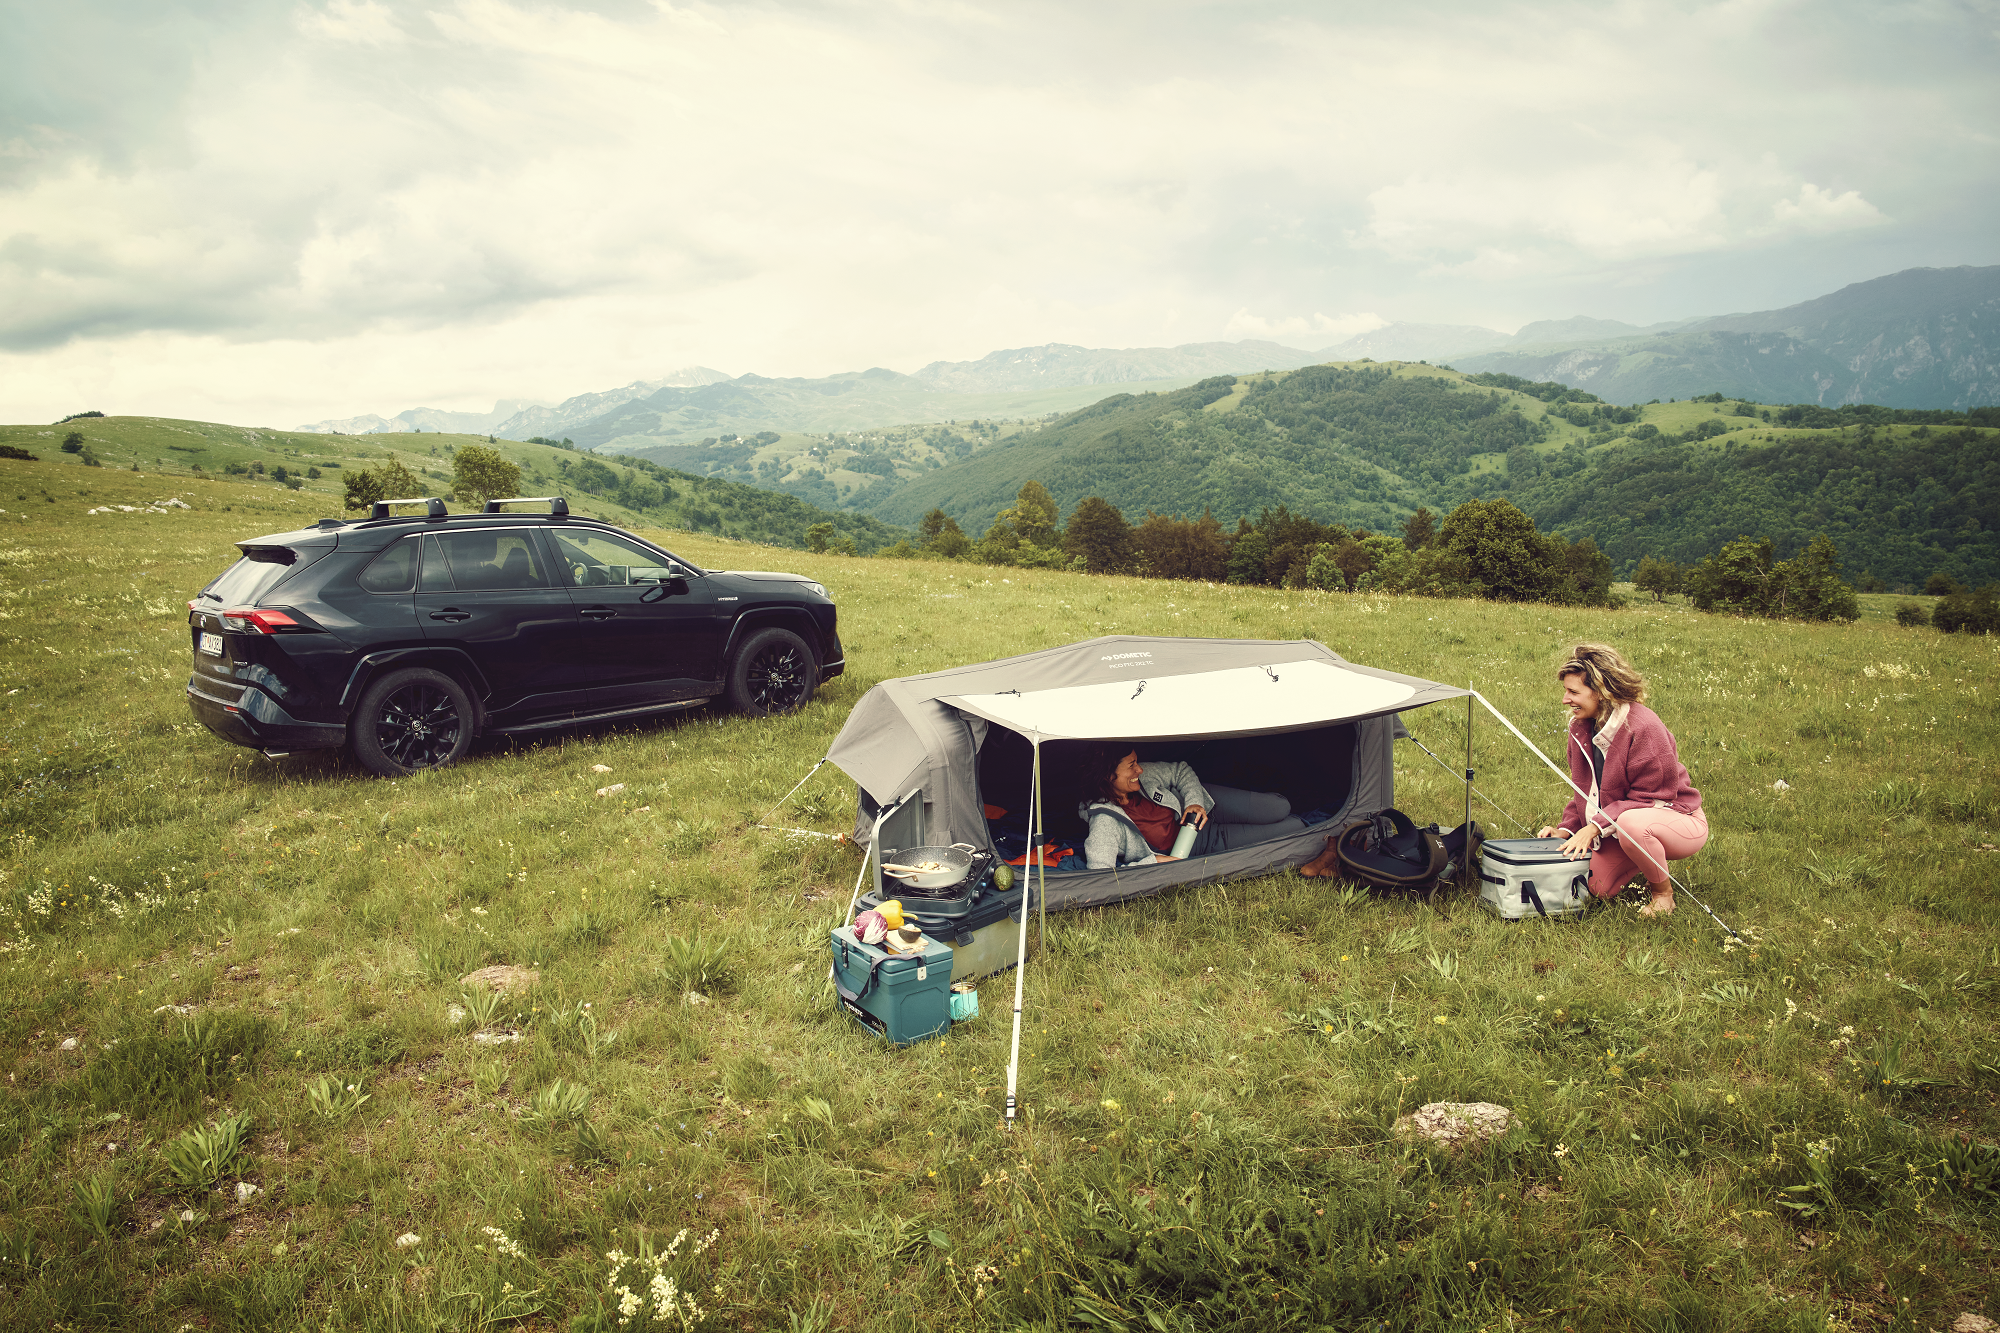 The Best Way To Camp: Tent vs Swag?